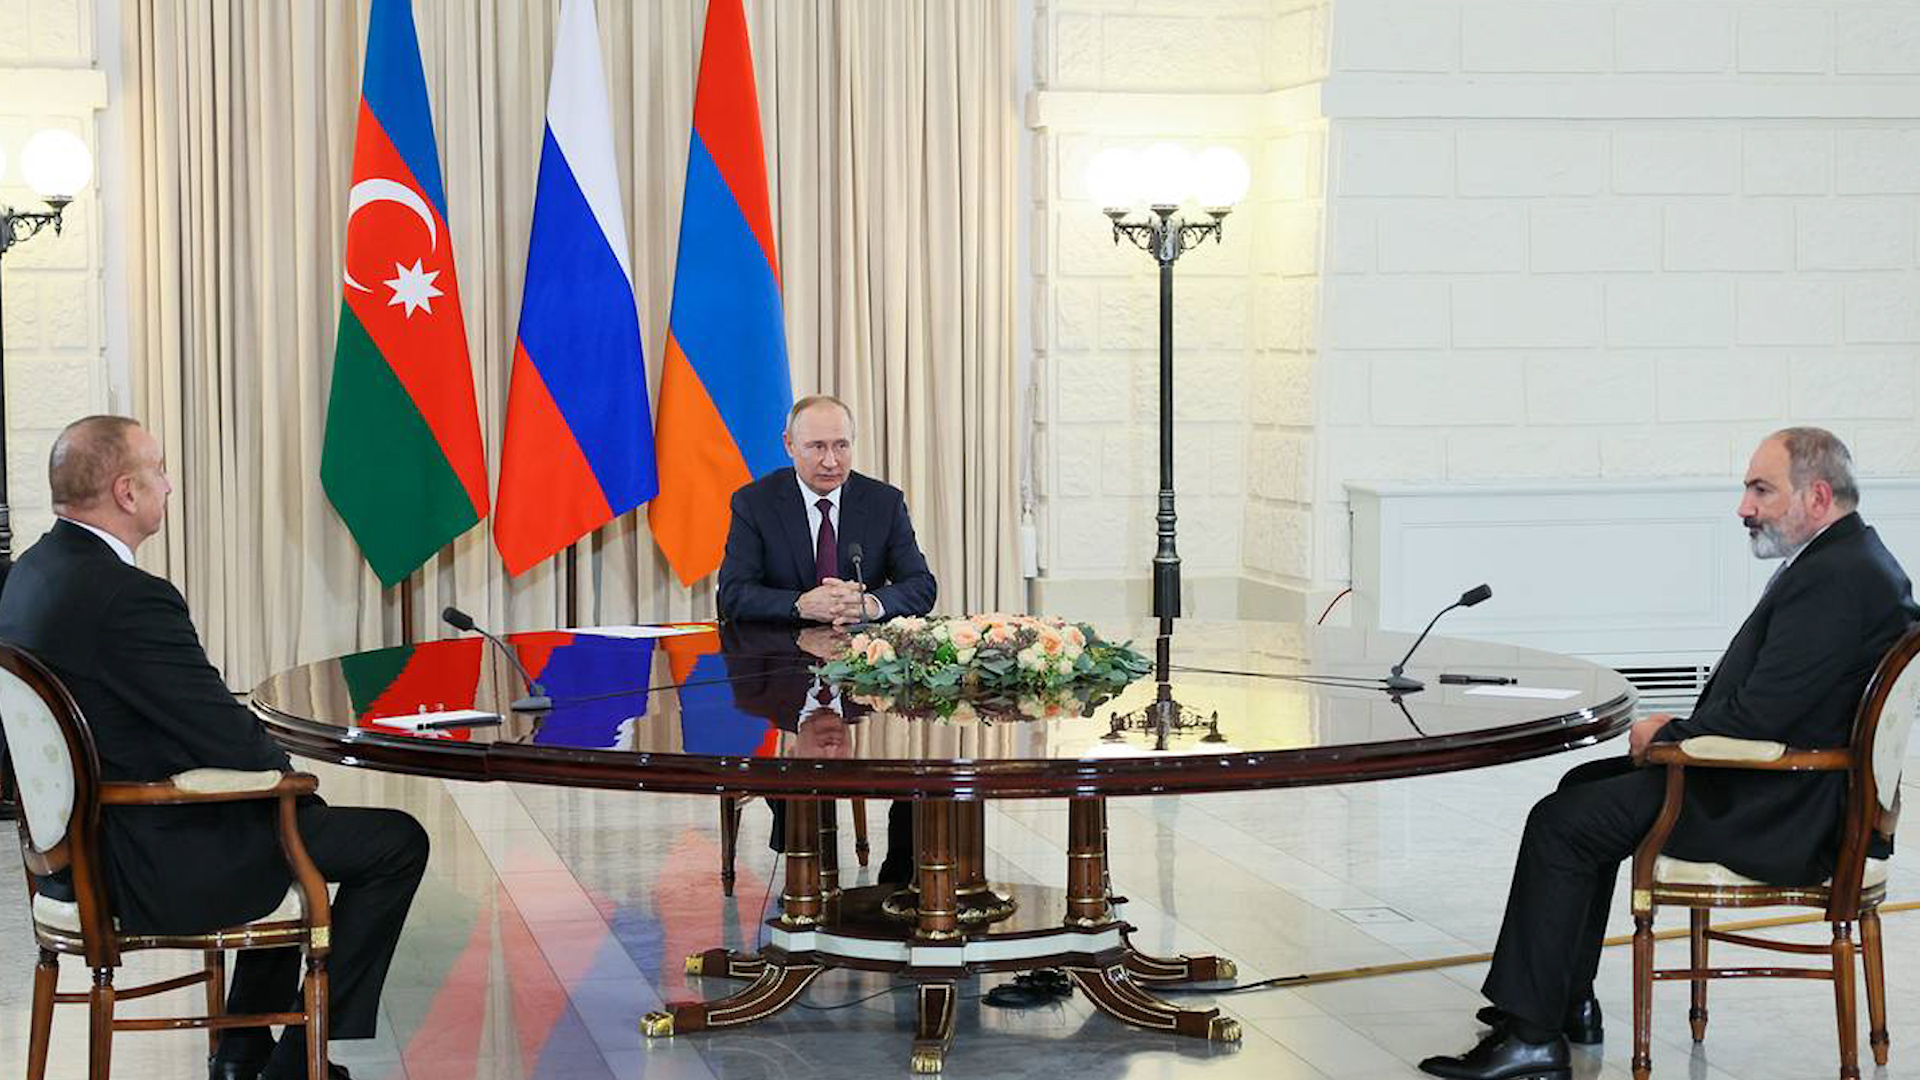 What came out of the Putin-Pashinyan-Aliyev meeting in Sochi?